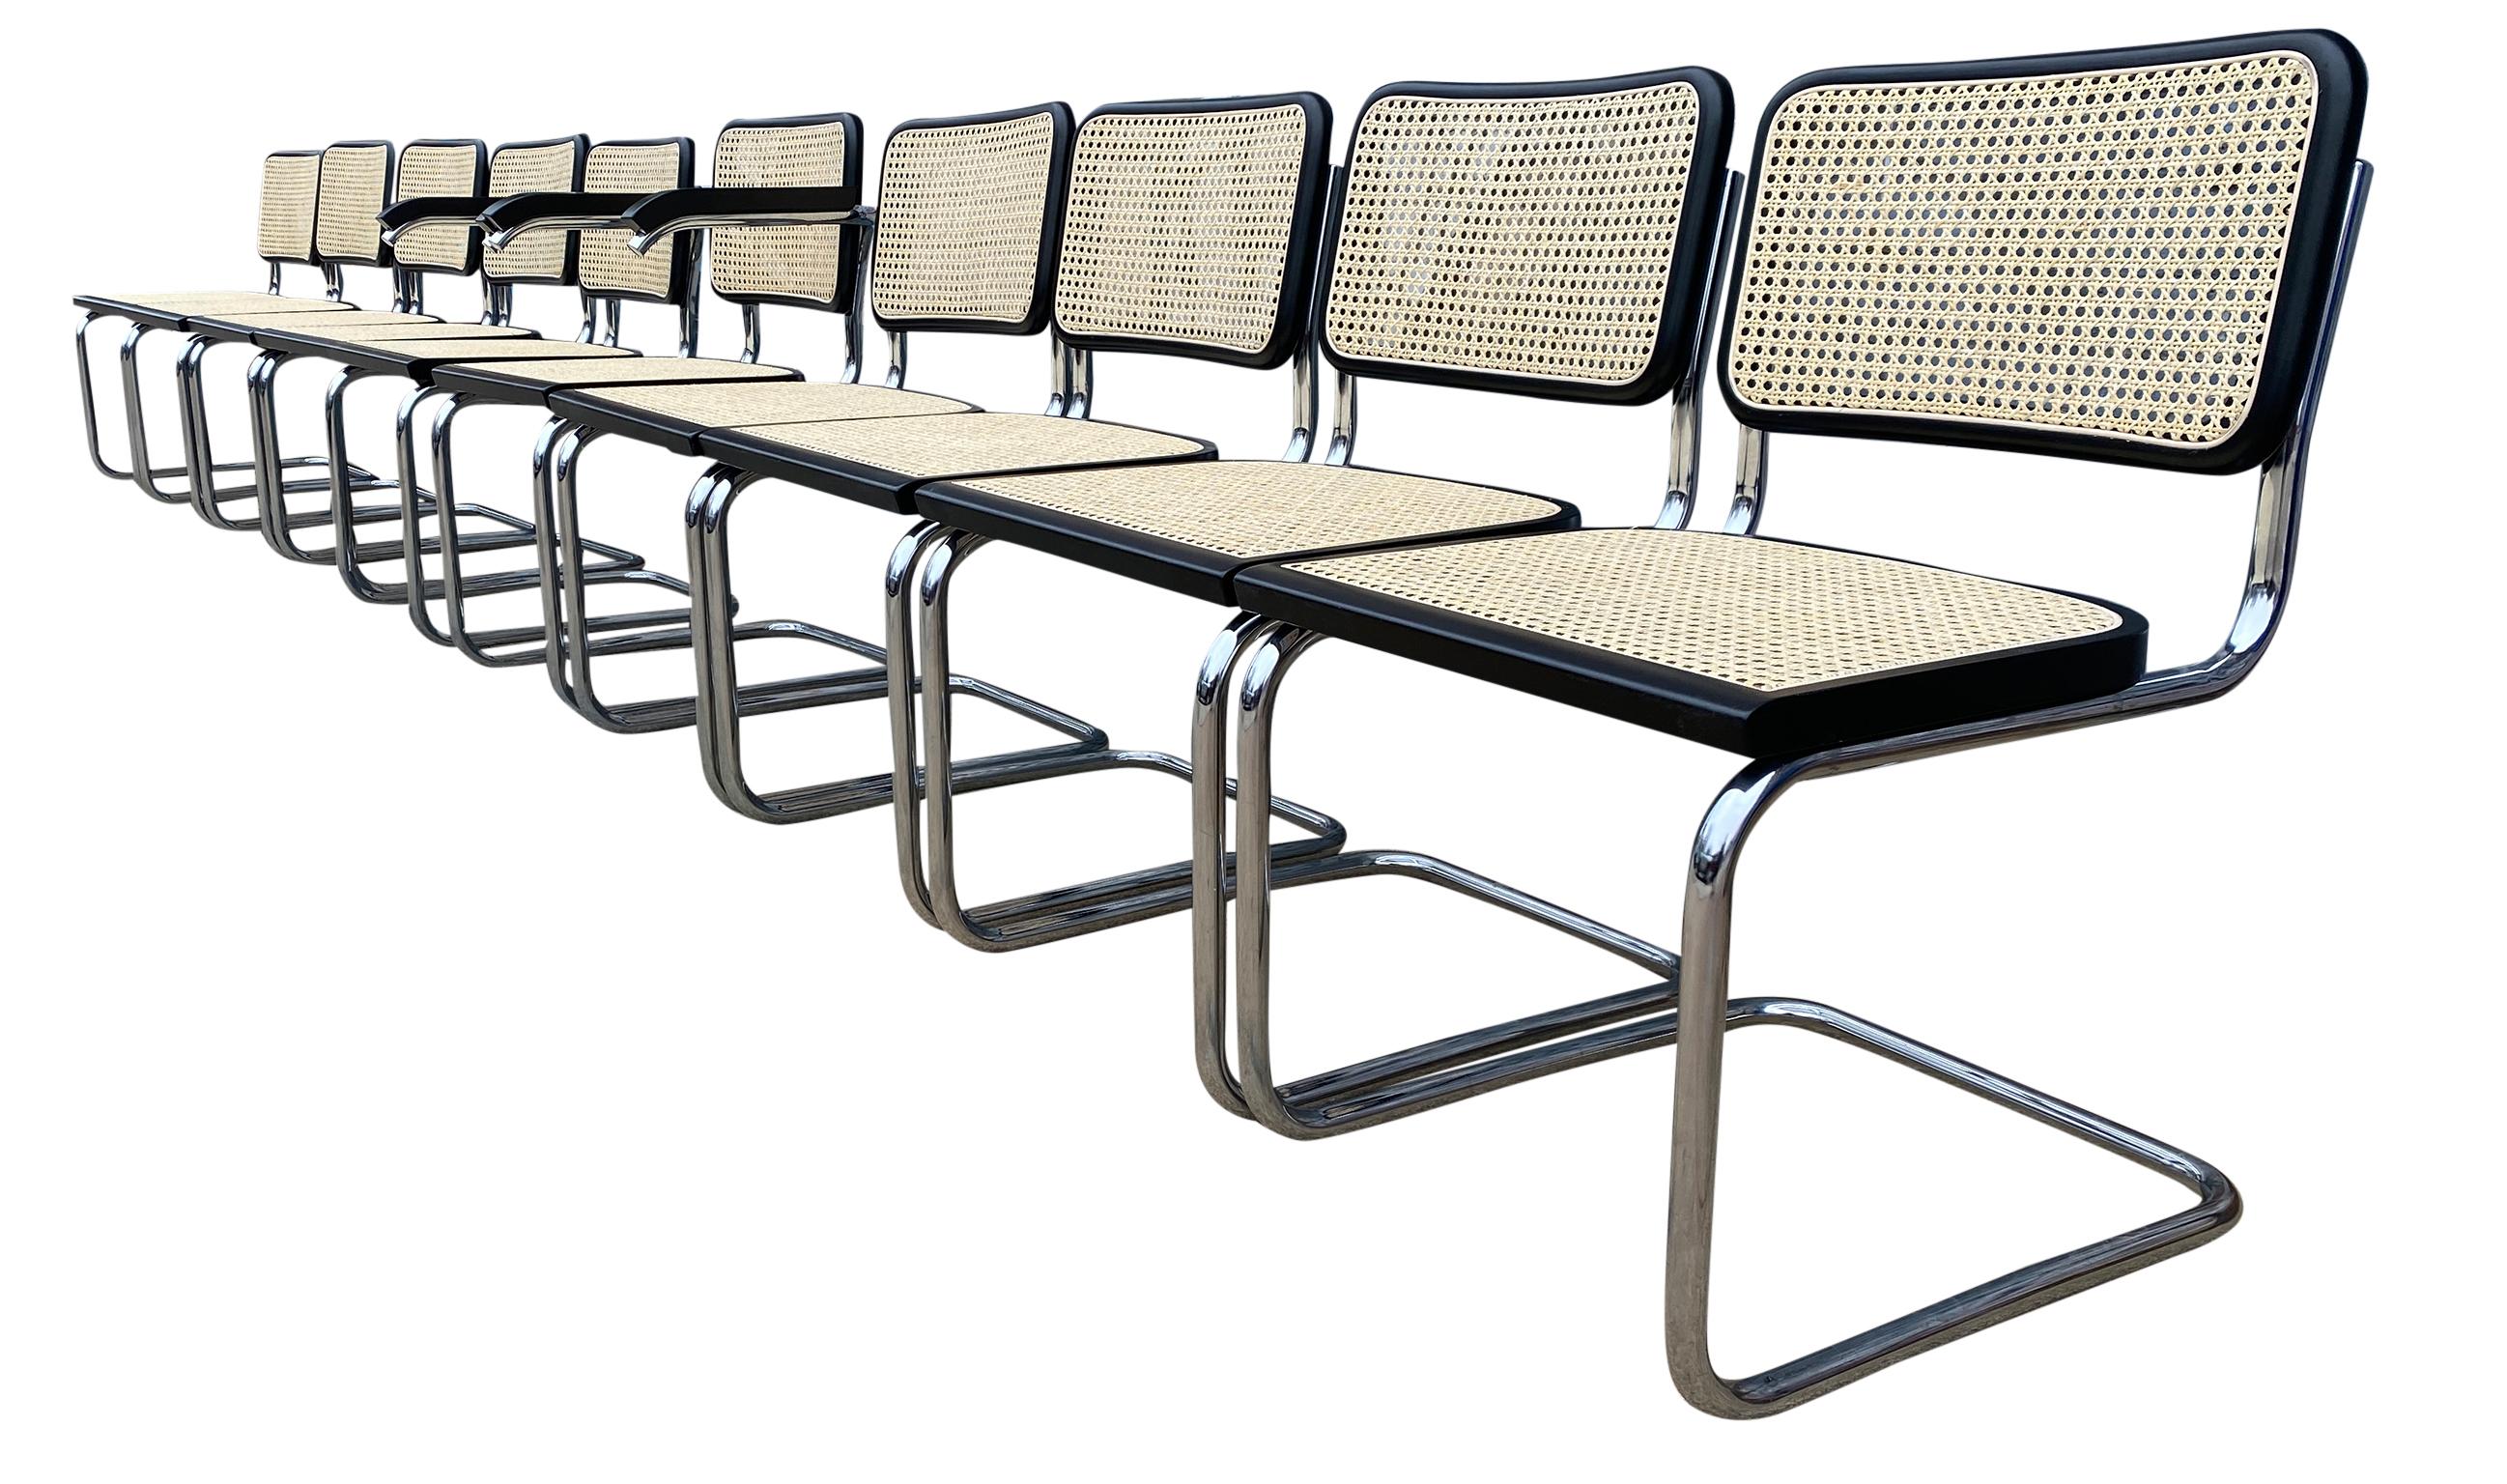 Set of matching 10 midcentury cesca chairs by Marcel Breuer / Thonet black chrome and cane. All original mid century Thonet steel chrome seamless cantilever frames. No connection in tube all 1 section also no caps seamless ends. All chairs have new